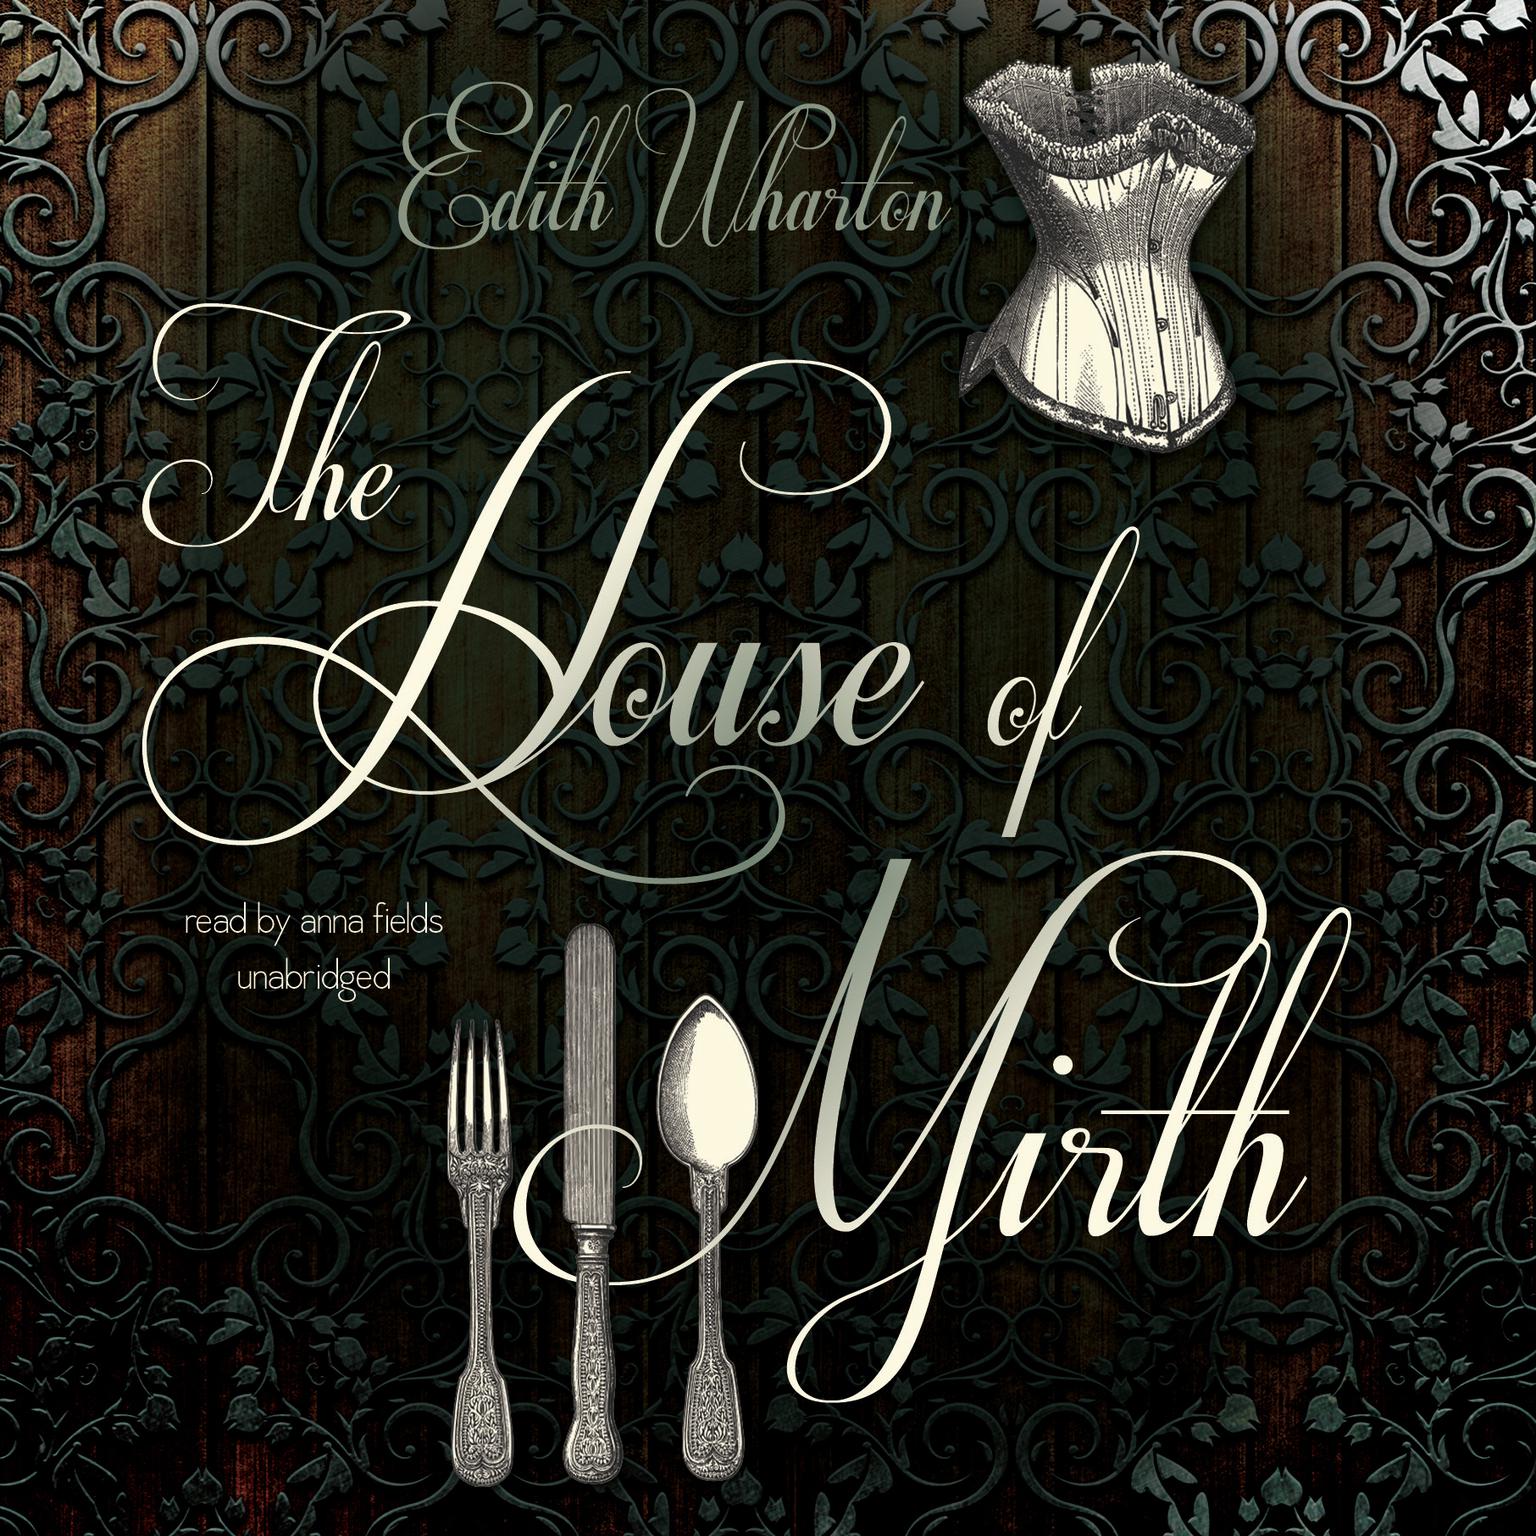 The House of Mirth Audiobook, by Edith Wharton